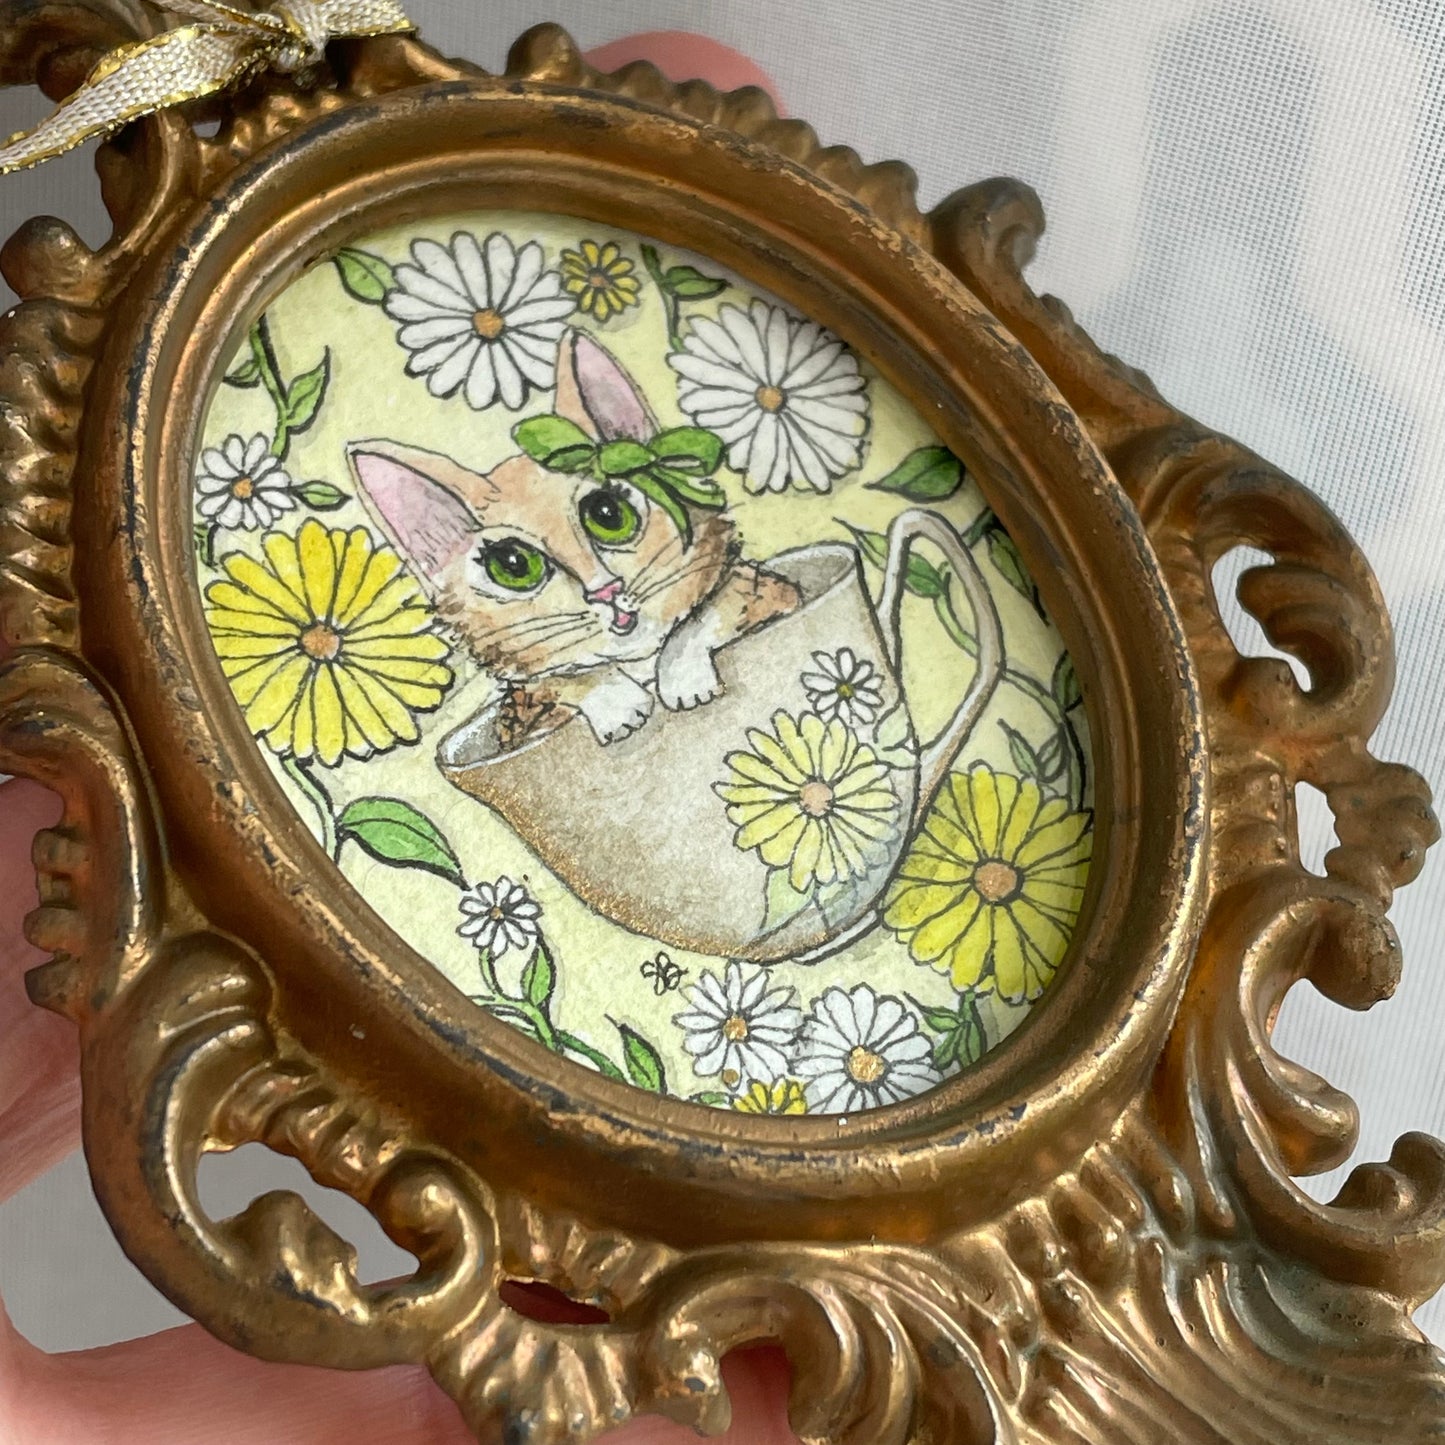 Tea Cup Kitten in Vintage Frame Tiny Art Watercolor Painting